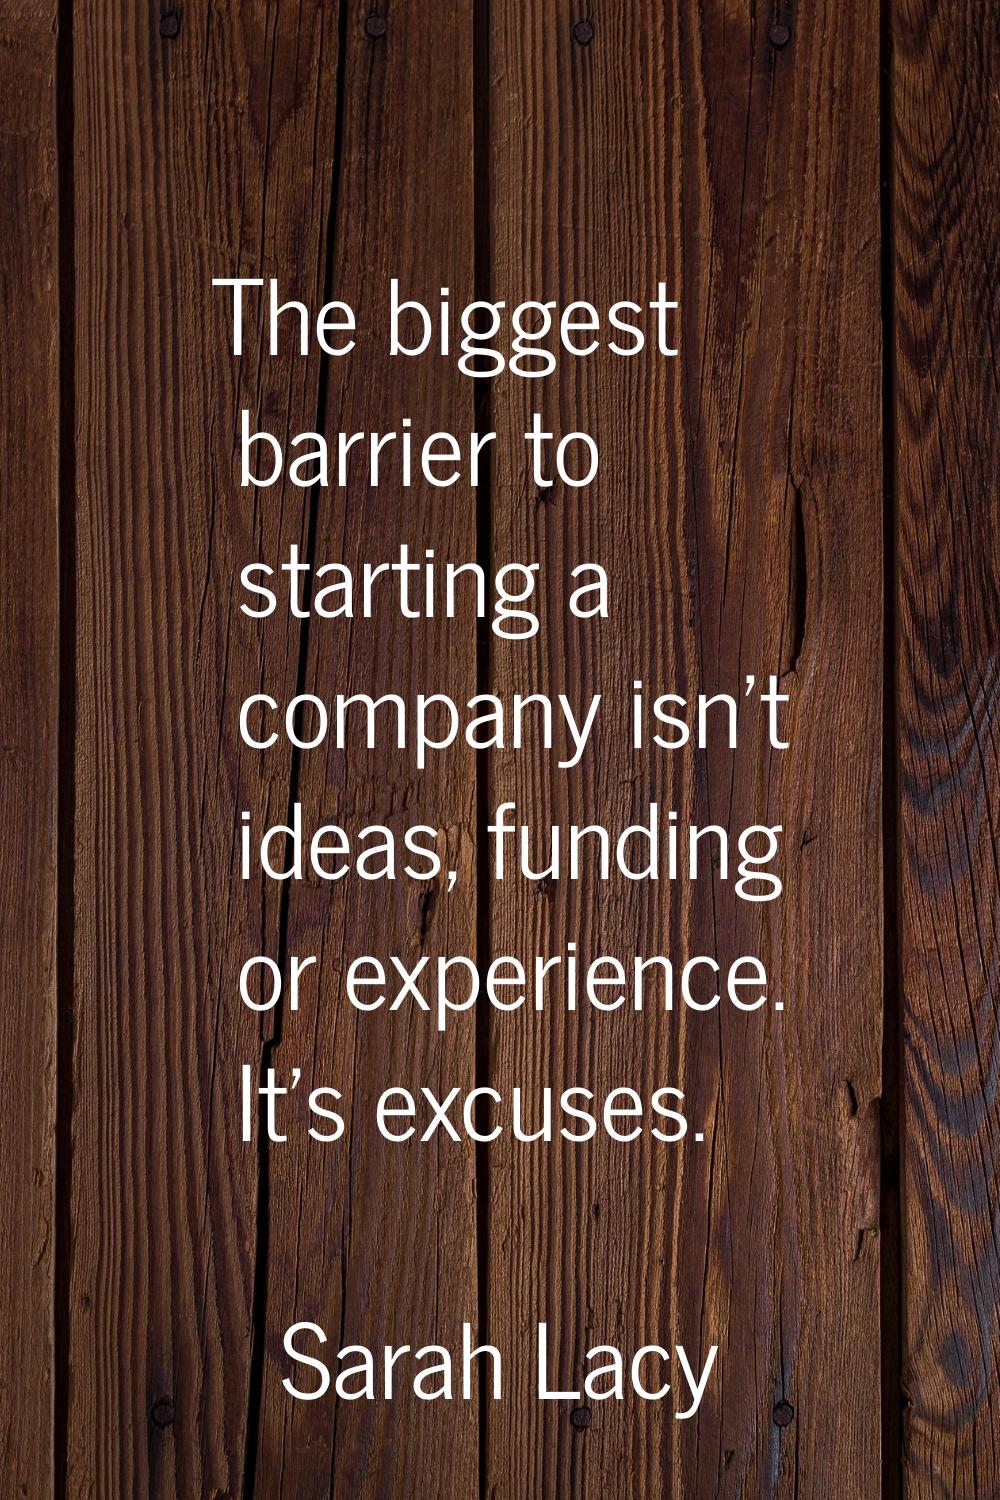 The biggest barrier to starting a company isn't ideas, funding or experience. It's excuses.